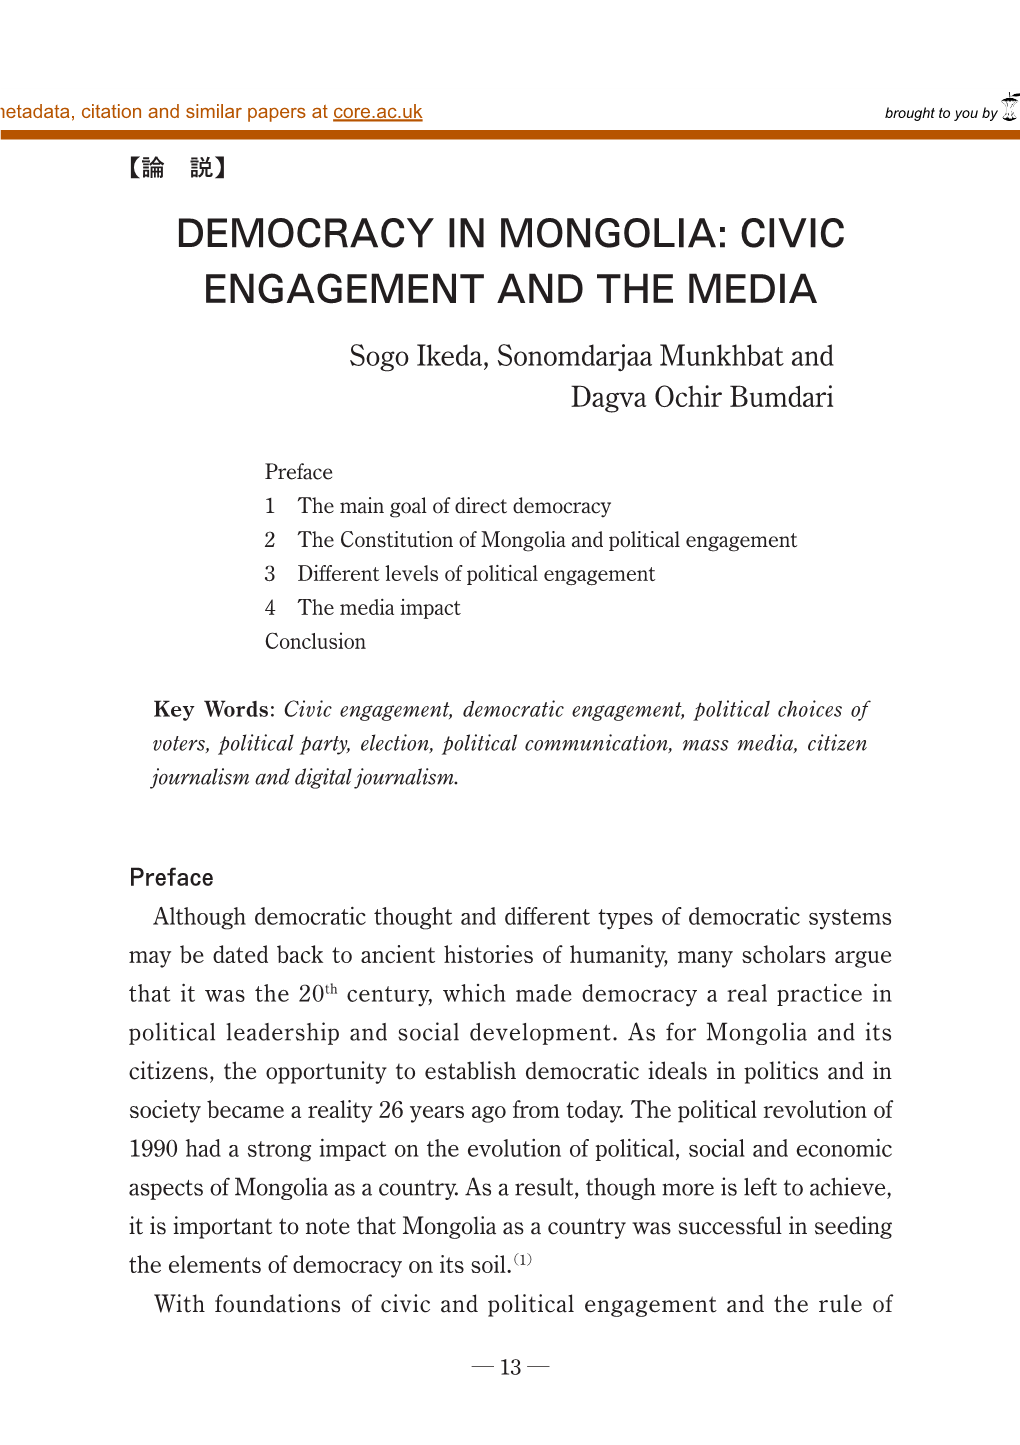 Democracy in Mongolia: Civic Engagement and the Media